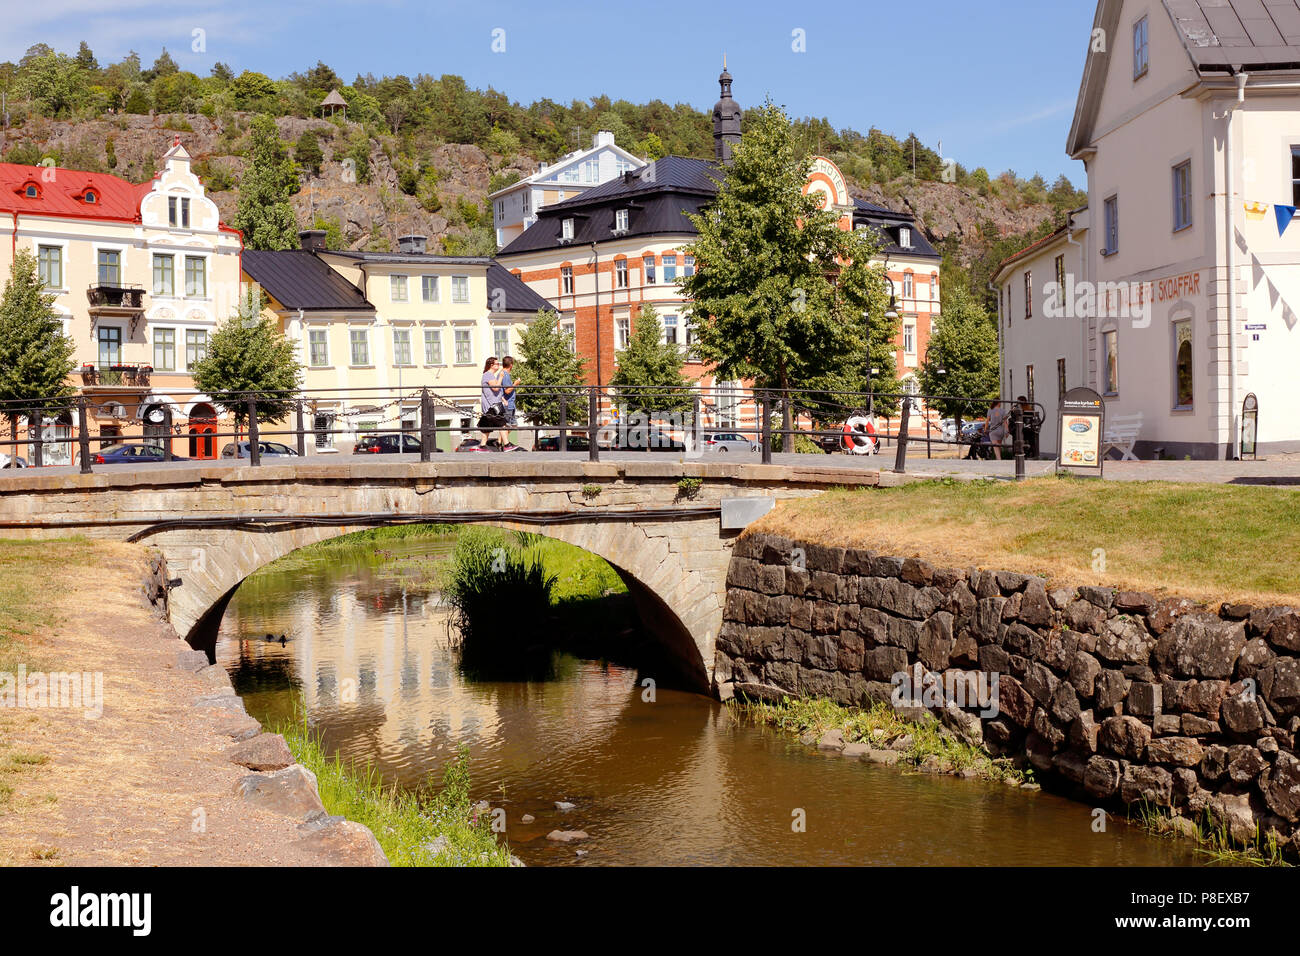 Soderkoping, Sweden - June 28, 2018: View of the Soderkoping river with a bridge in the town center. Stock Photo